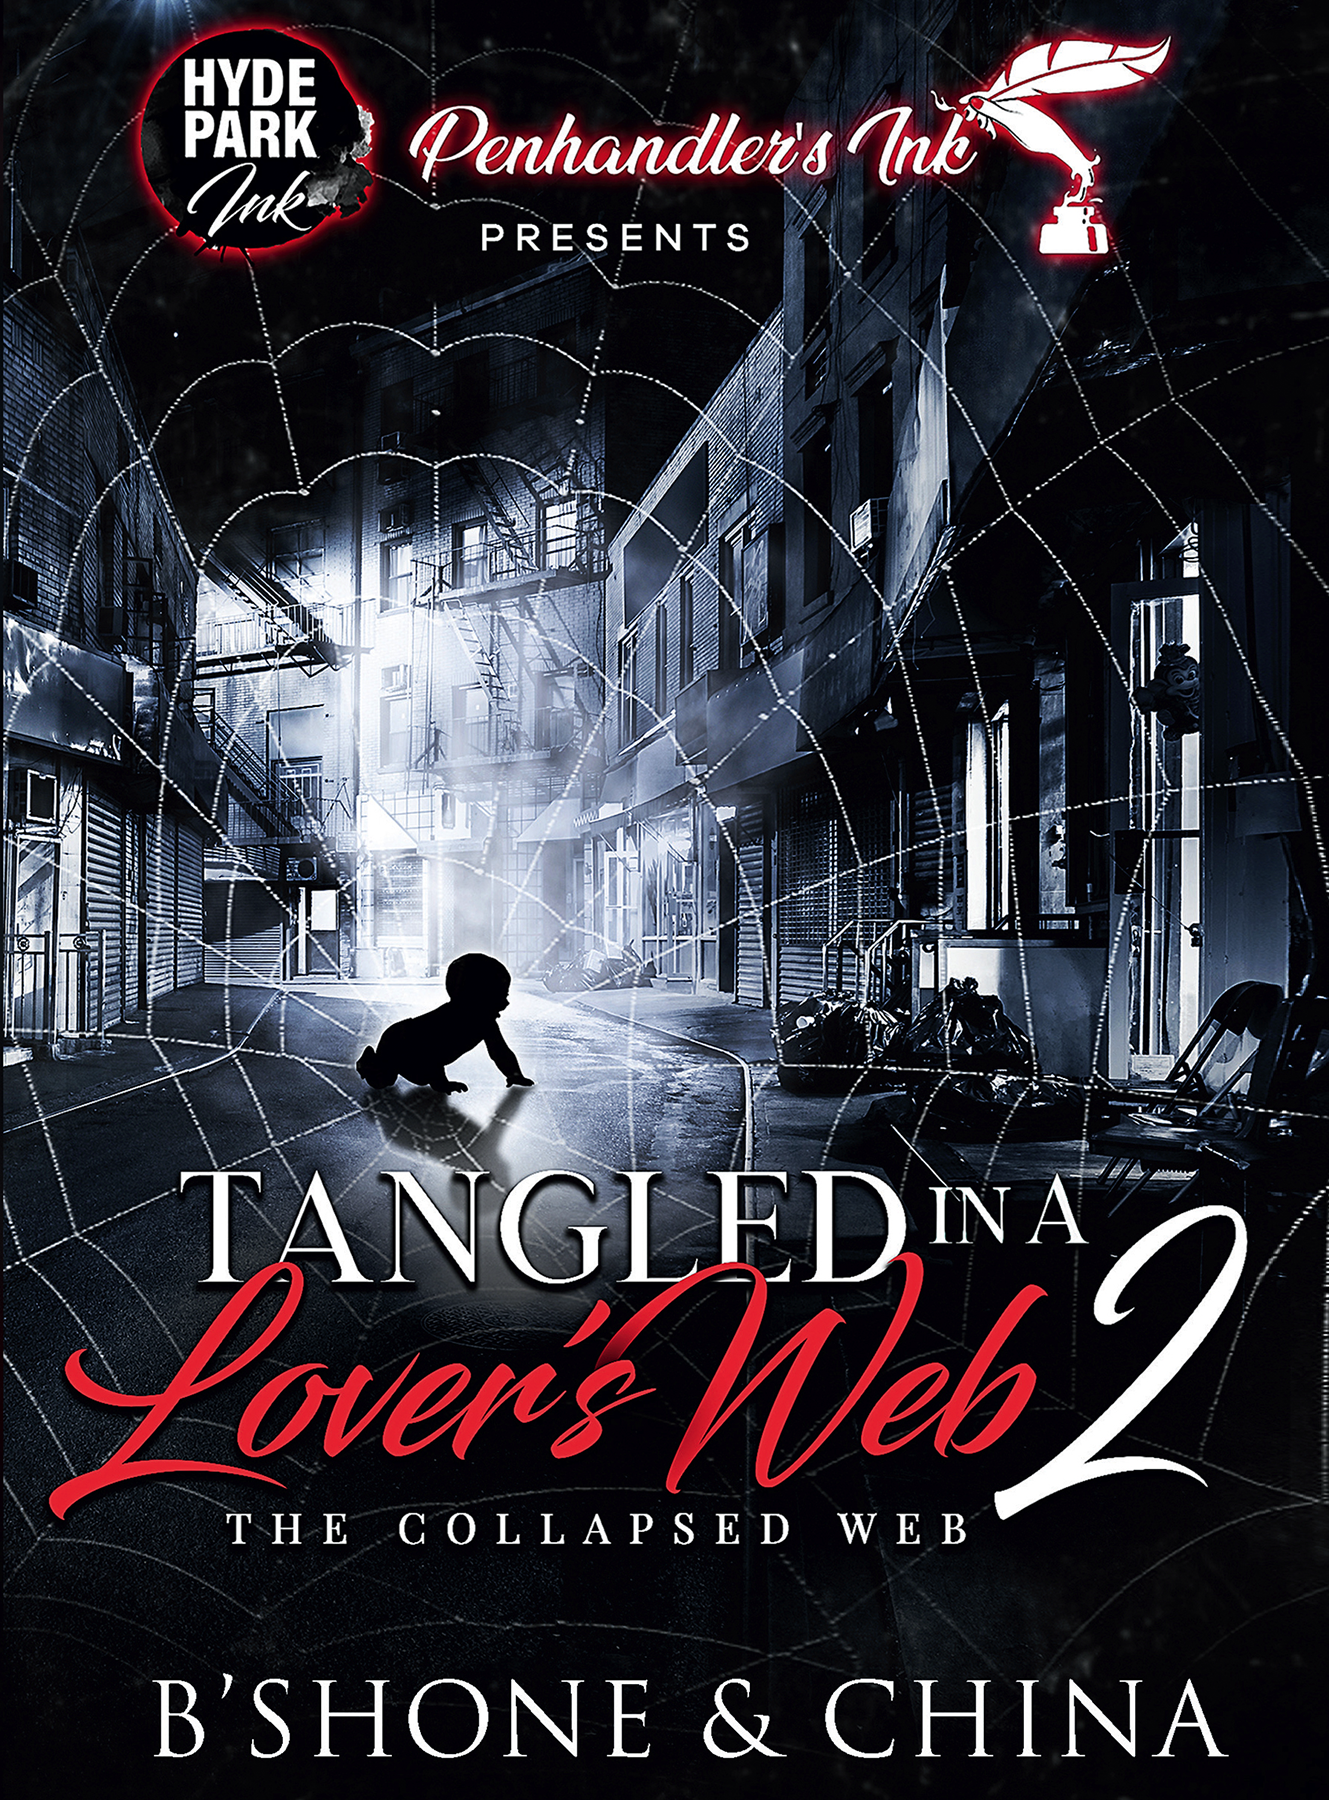 Tangled in a Lover's Web Part 2: Web Collapsed